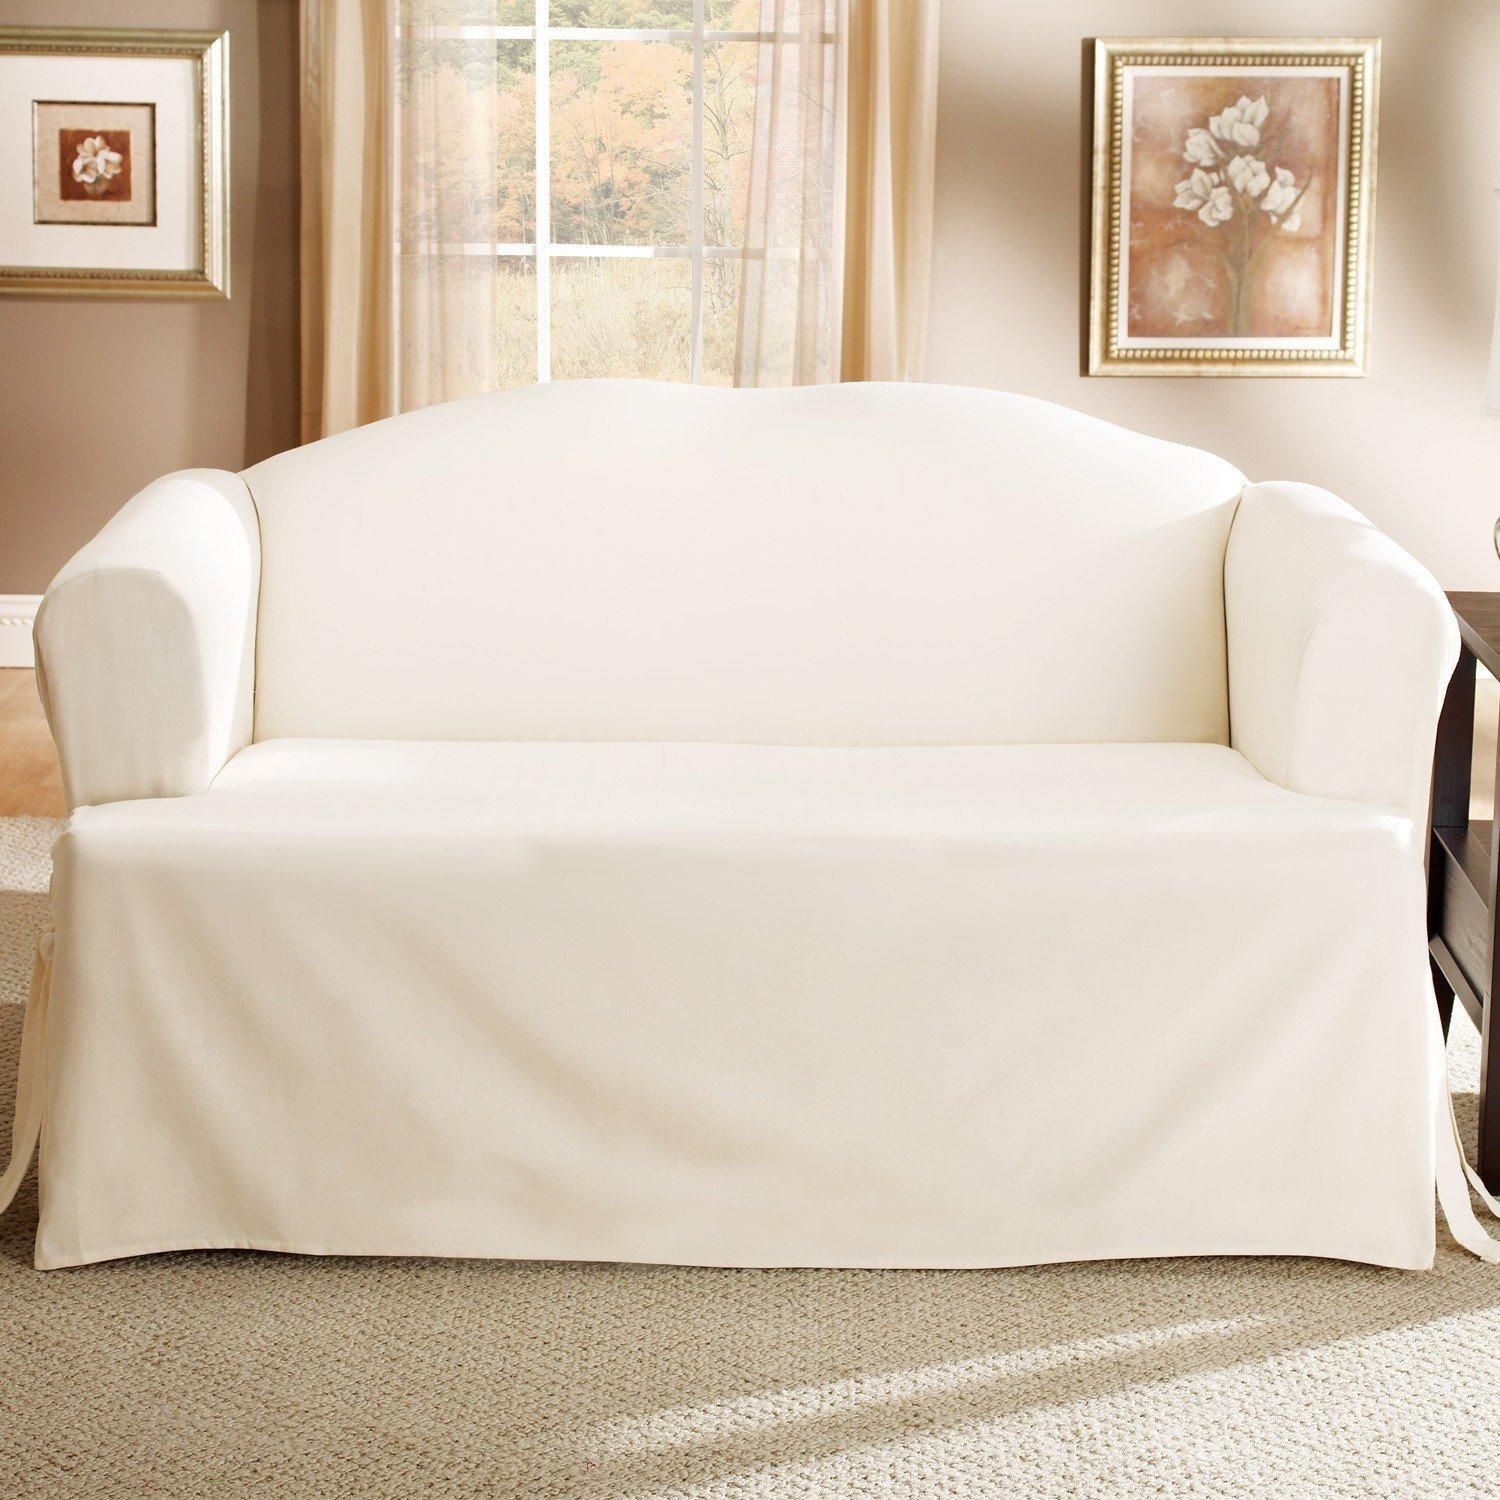 Couch Slipcovers For Reclining Sofa – Laura Williams Pertaining To Slipcover For Recliner Sofas (View 17 of 20)